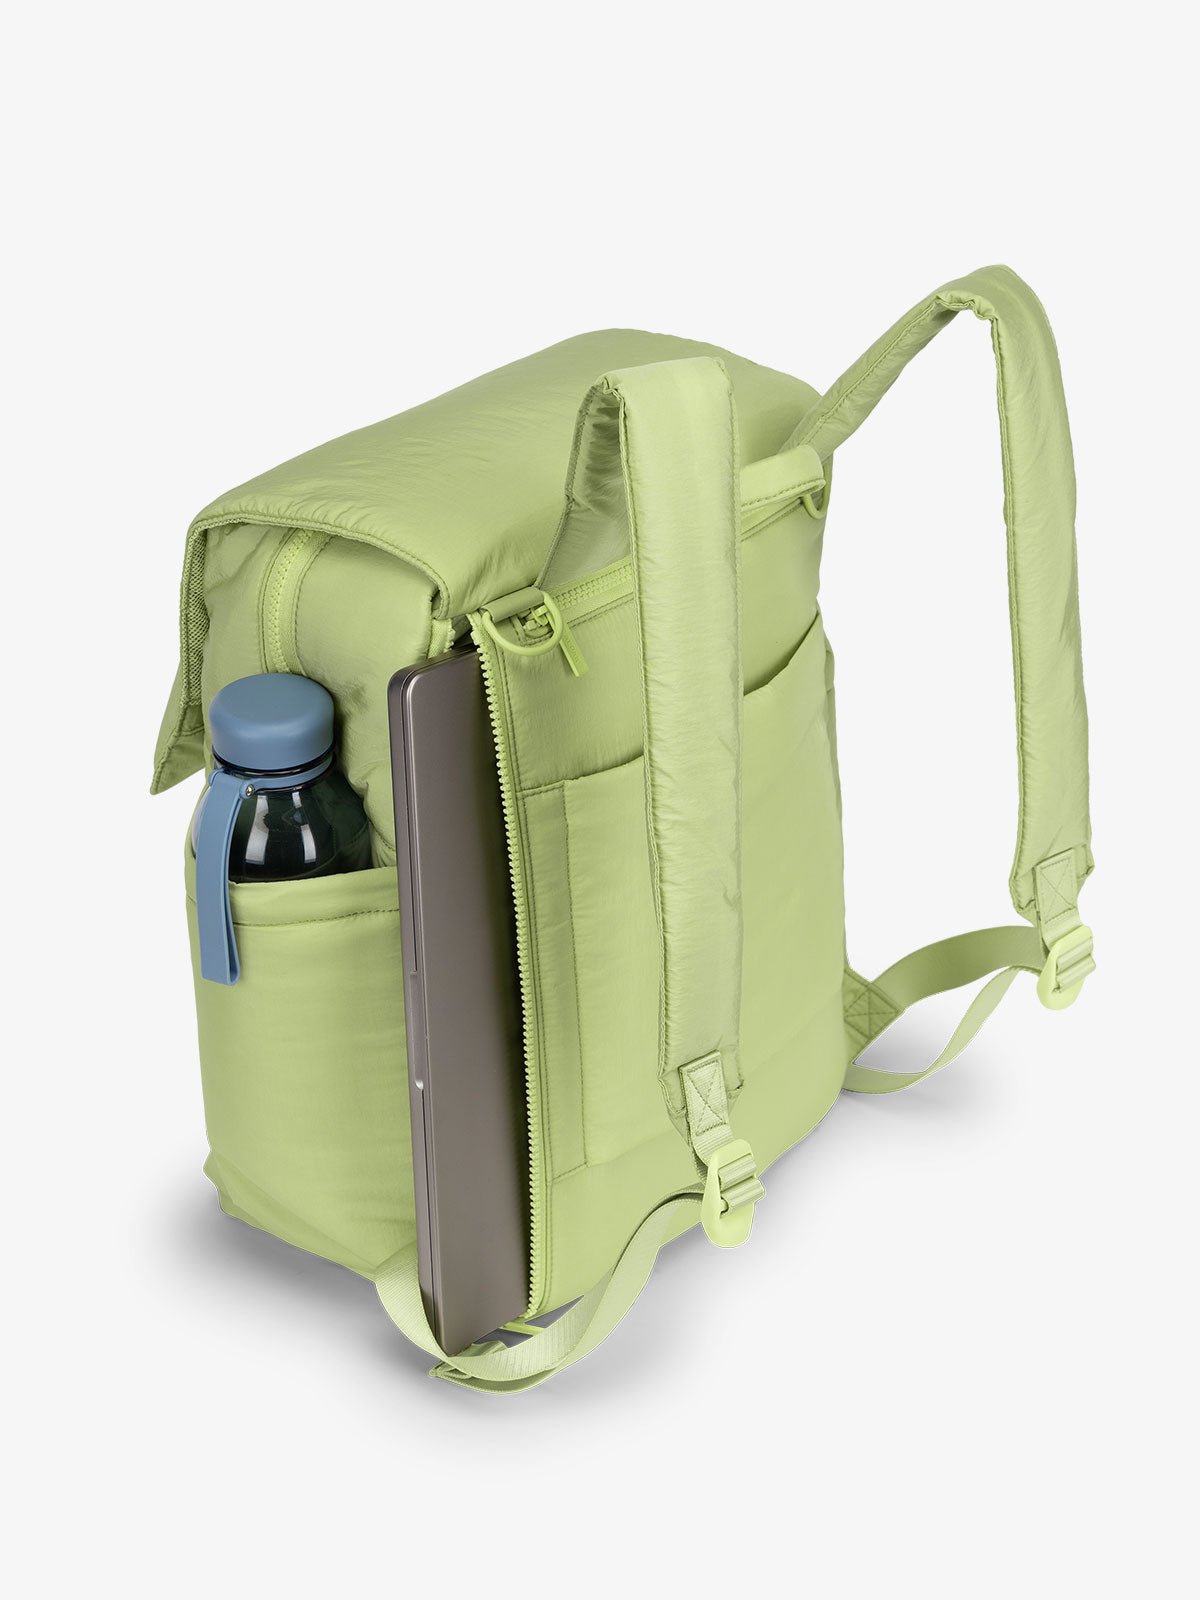 Green CALPAK diaper backpack with 14 inch laptop sleeve and adjustable shoulder straps